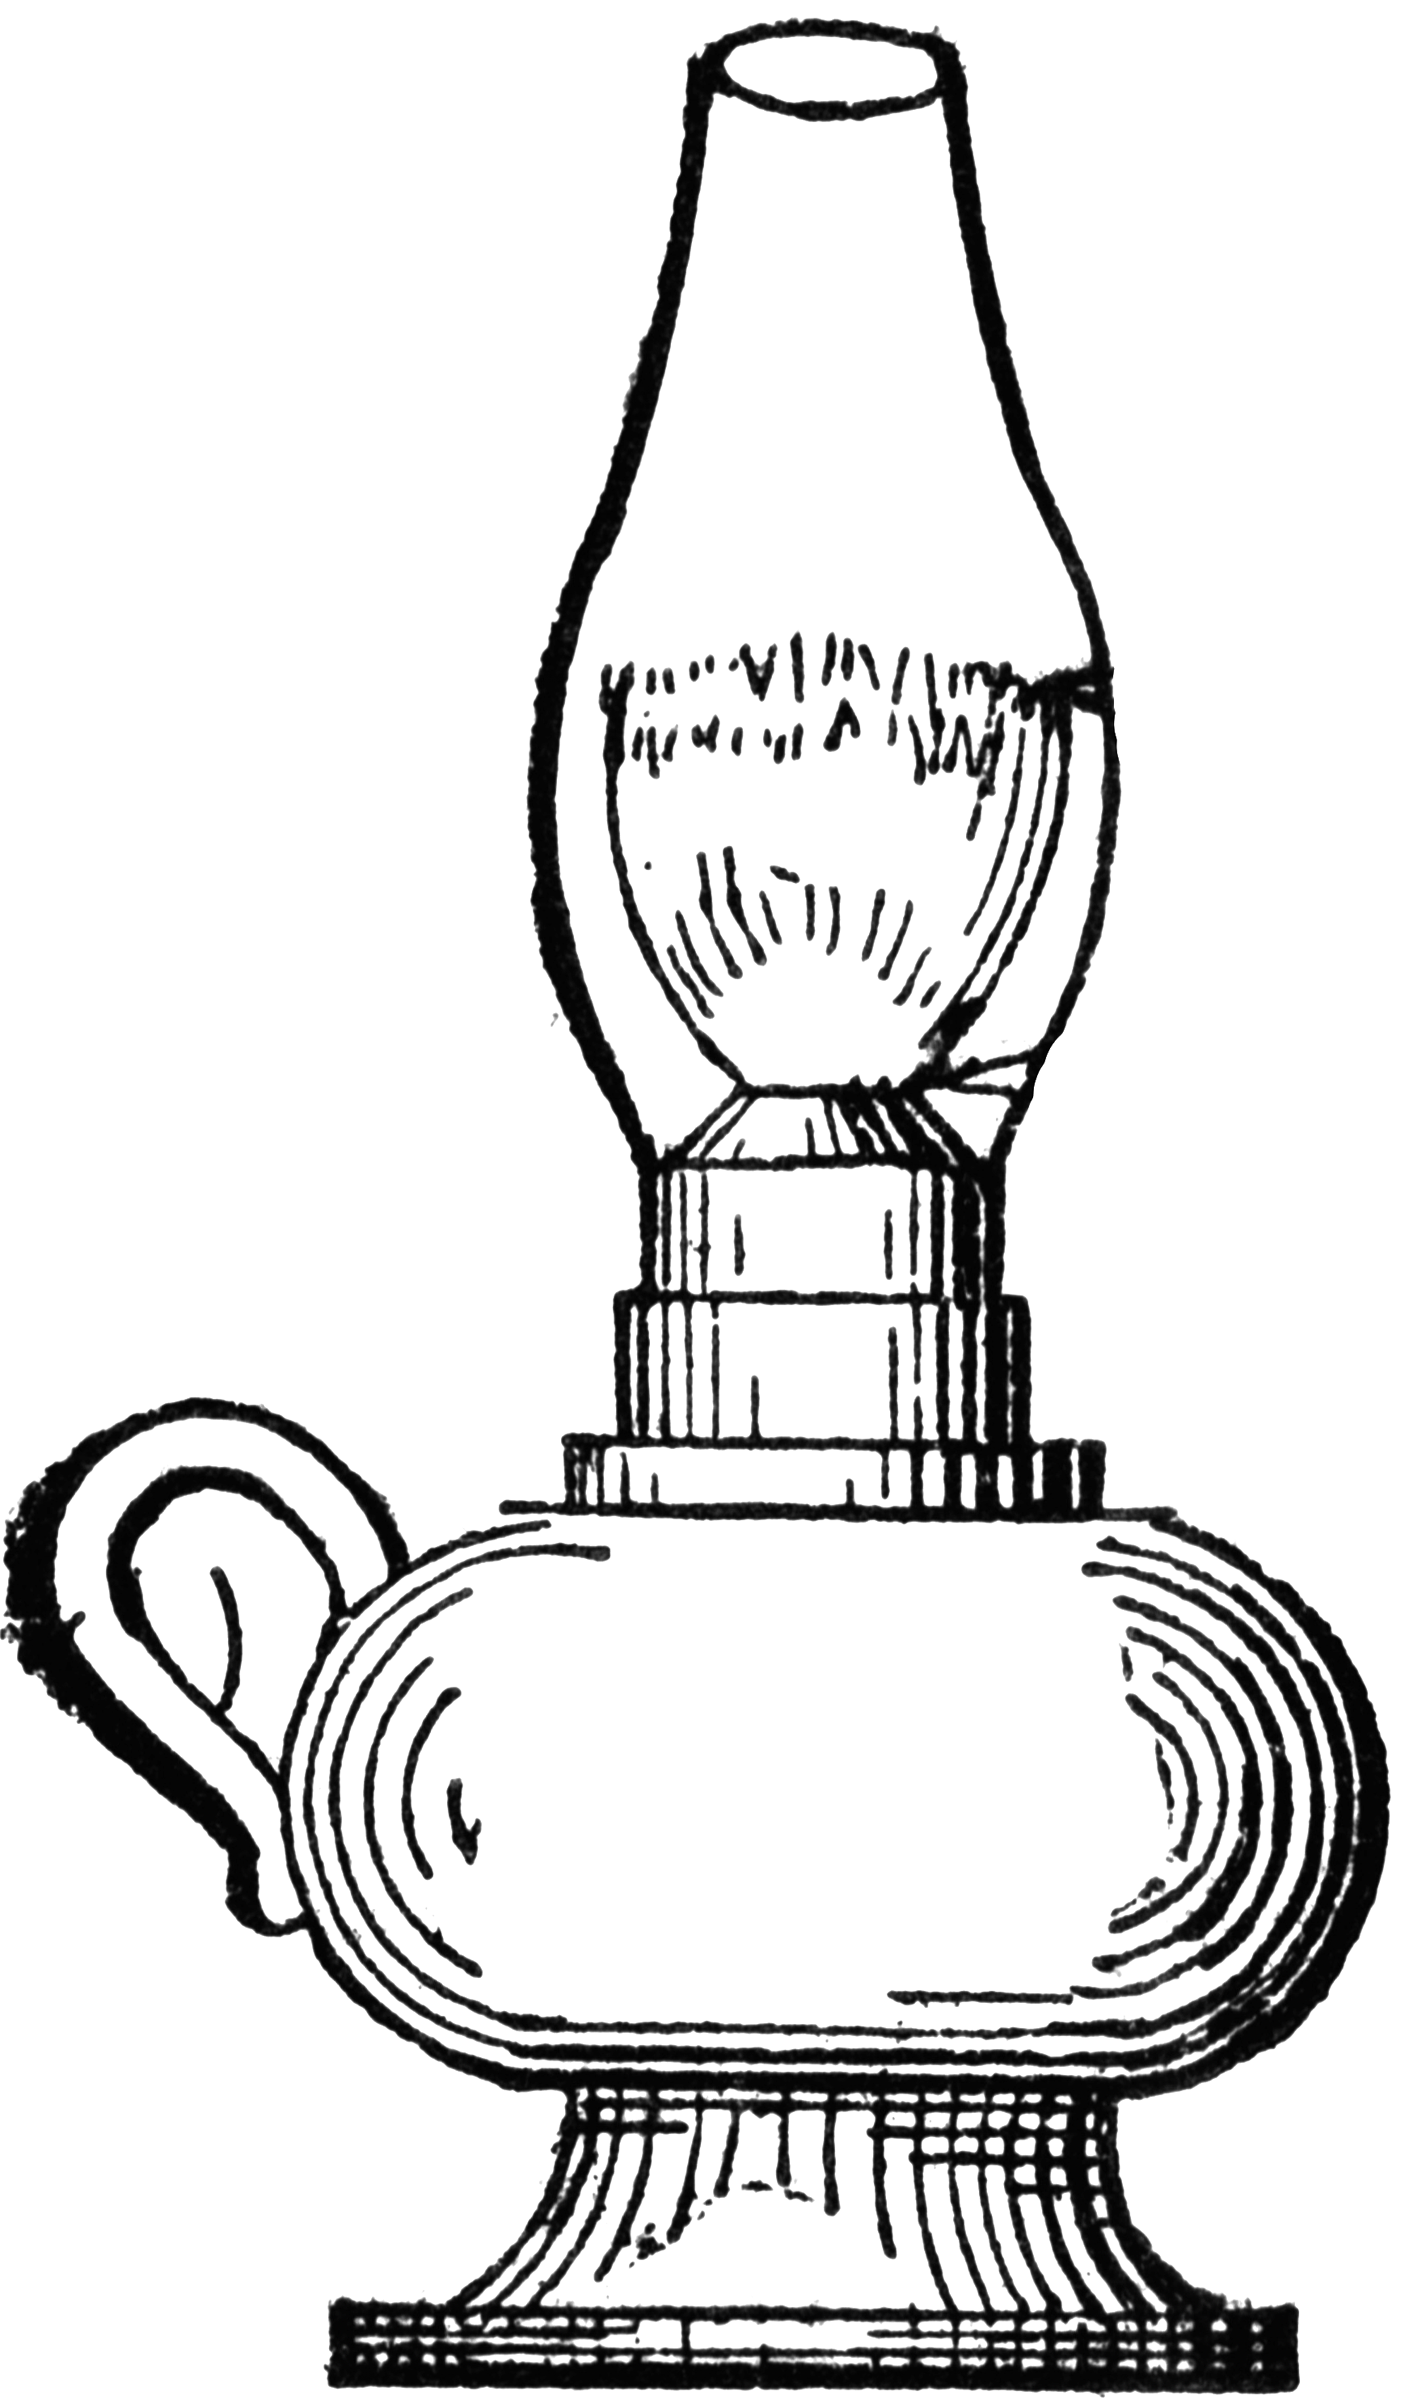 oil-lamp-coloring-page-sketch-coloring-page